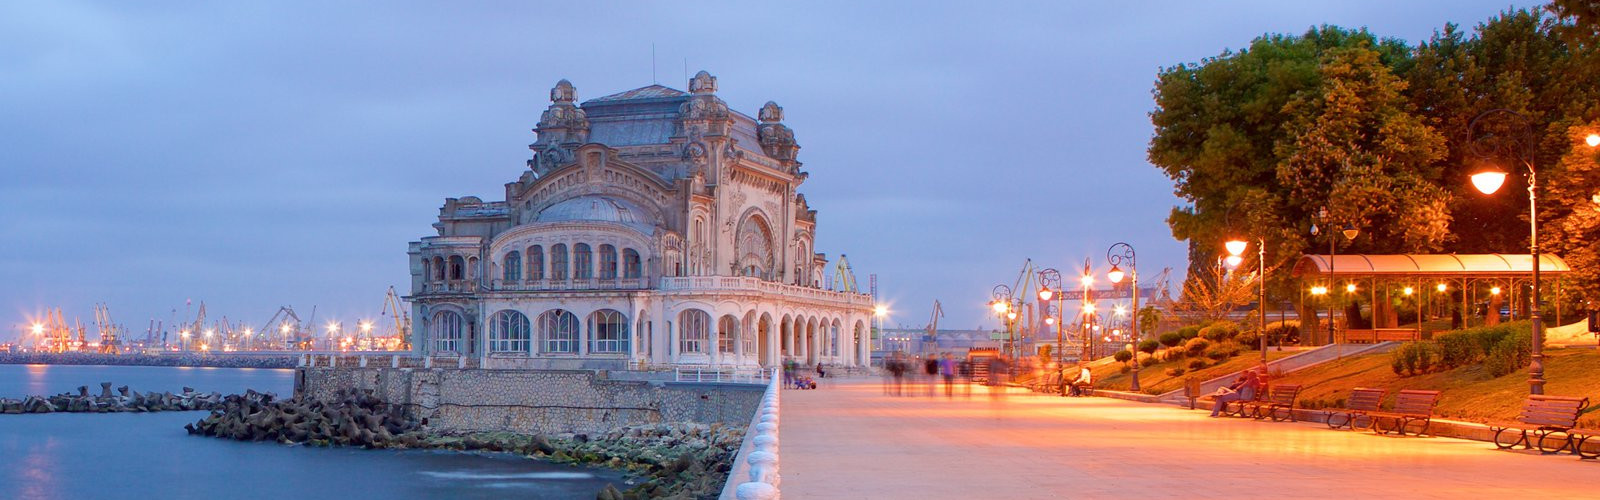 Hotels next to the Casino in ConstanțaThe abandoned casino in Constanta, a new art building overlooking the Black Sea. <br>
these ruins evoke the wild parties of a time when travelers come from all over Europe play to the end of the night.